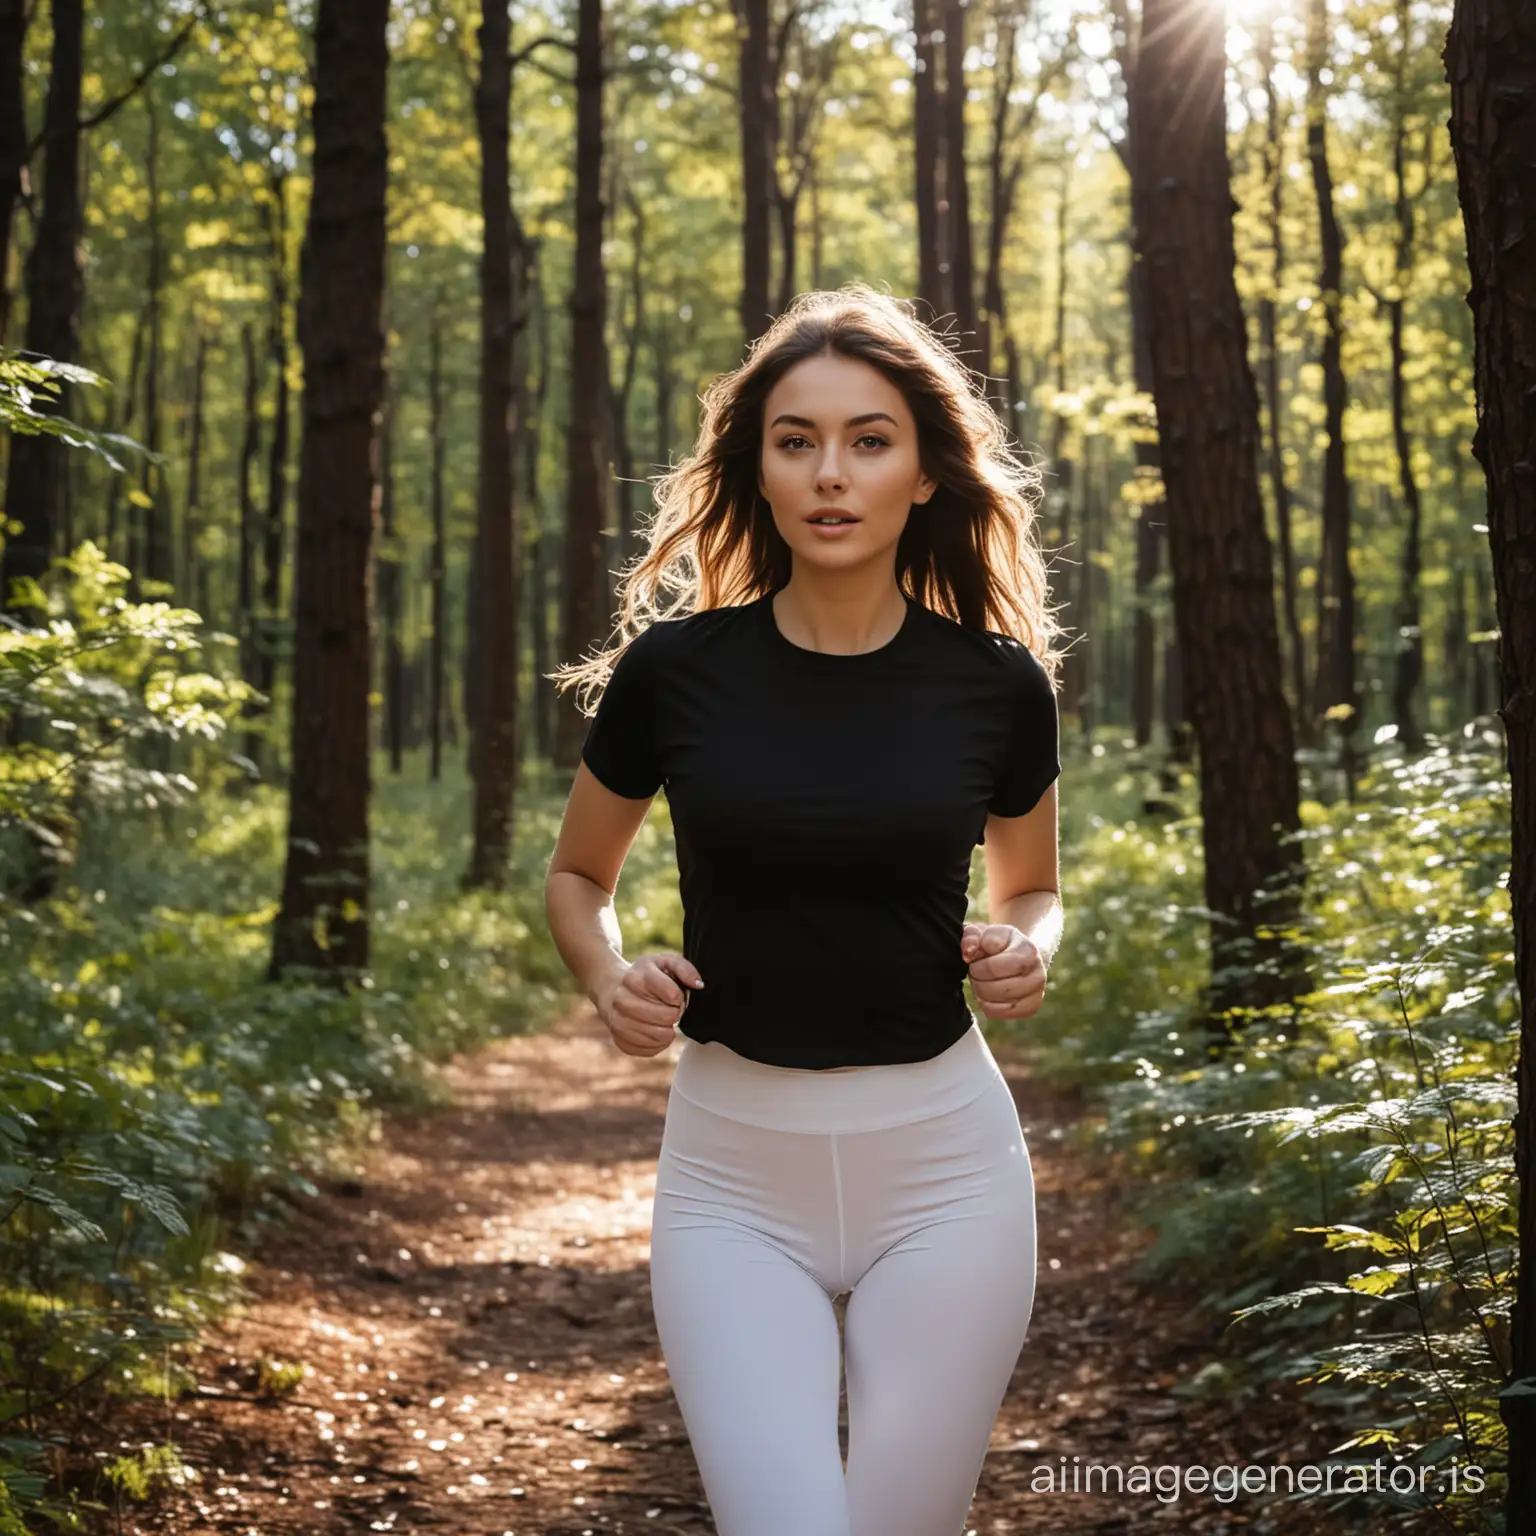 Gorgeous young brunette woman running in dark forest in white leggings and black t-shirt, sun shines through the leaves